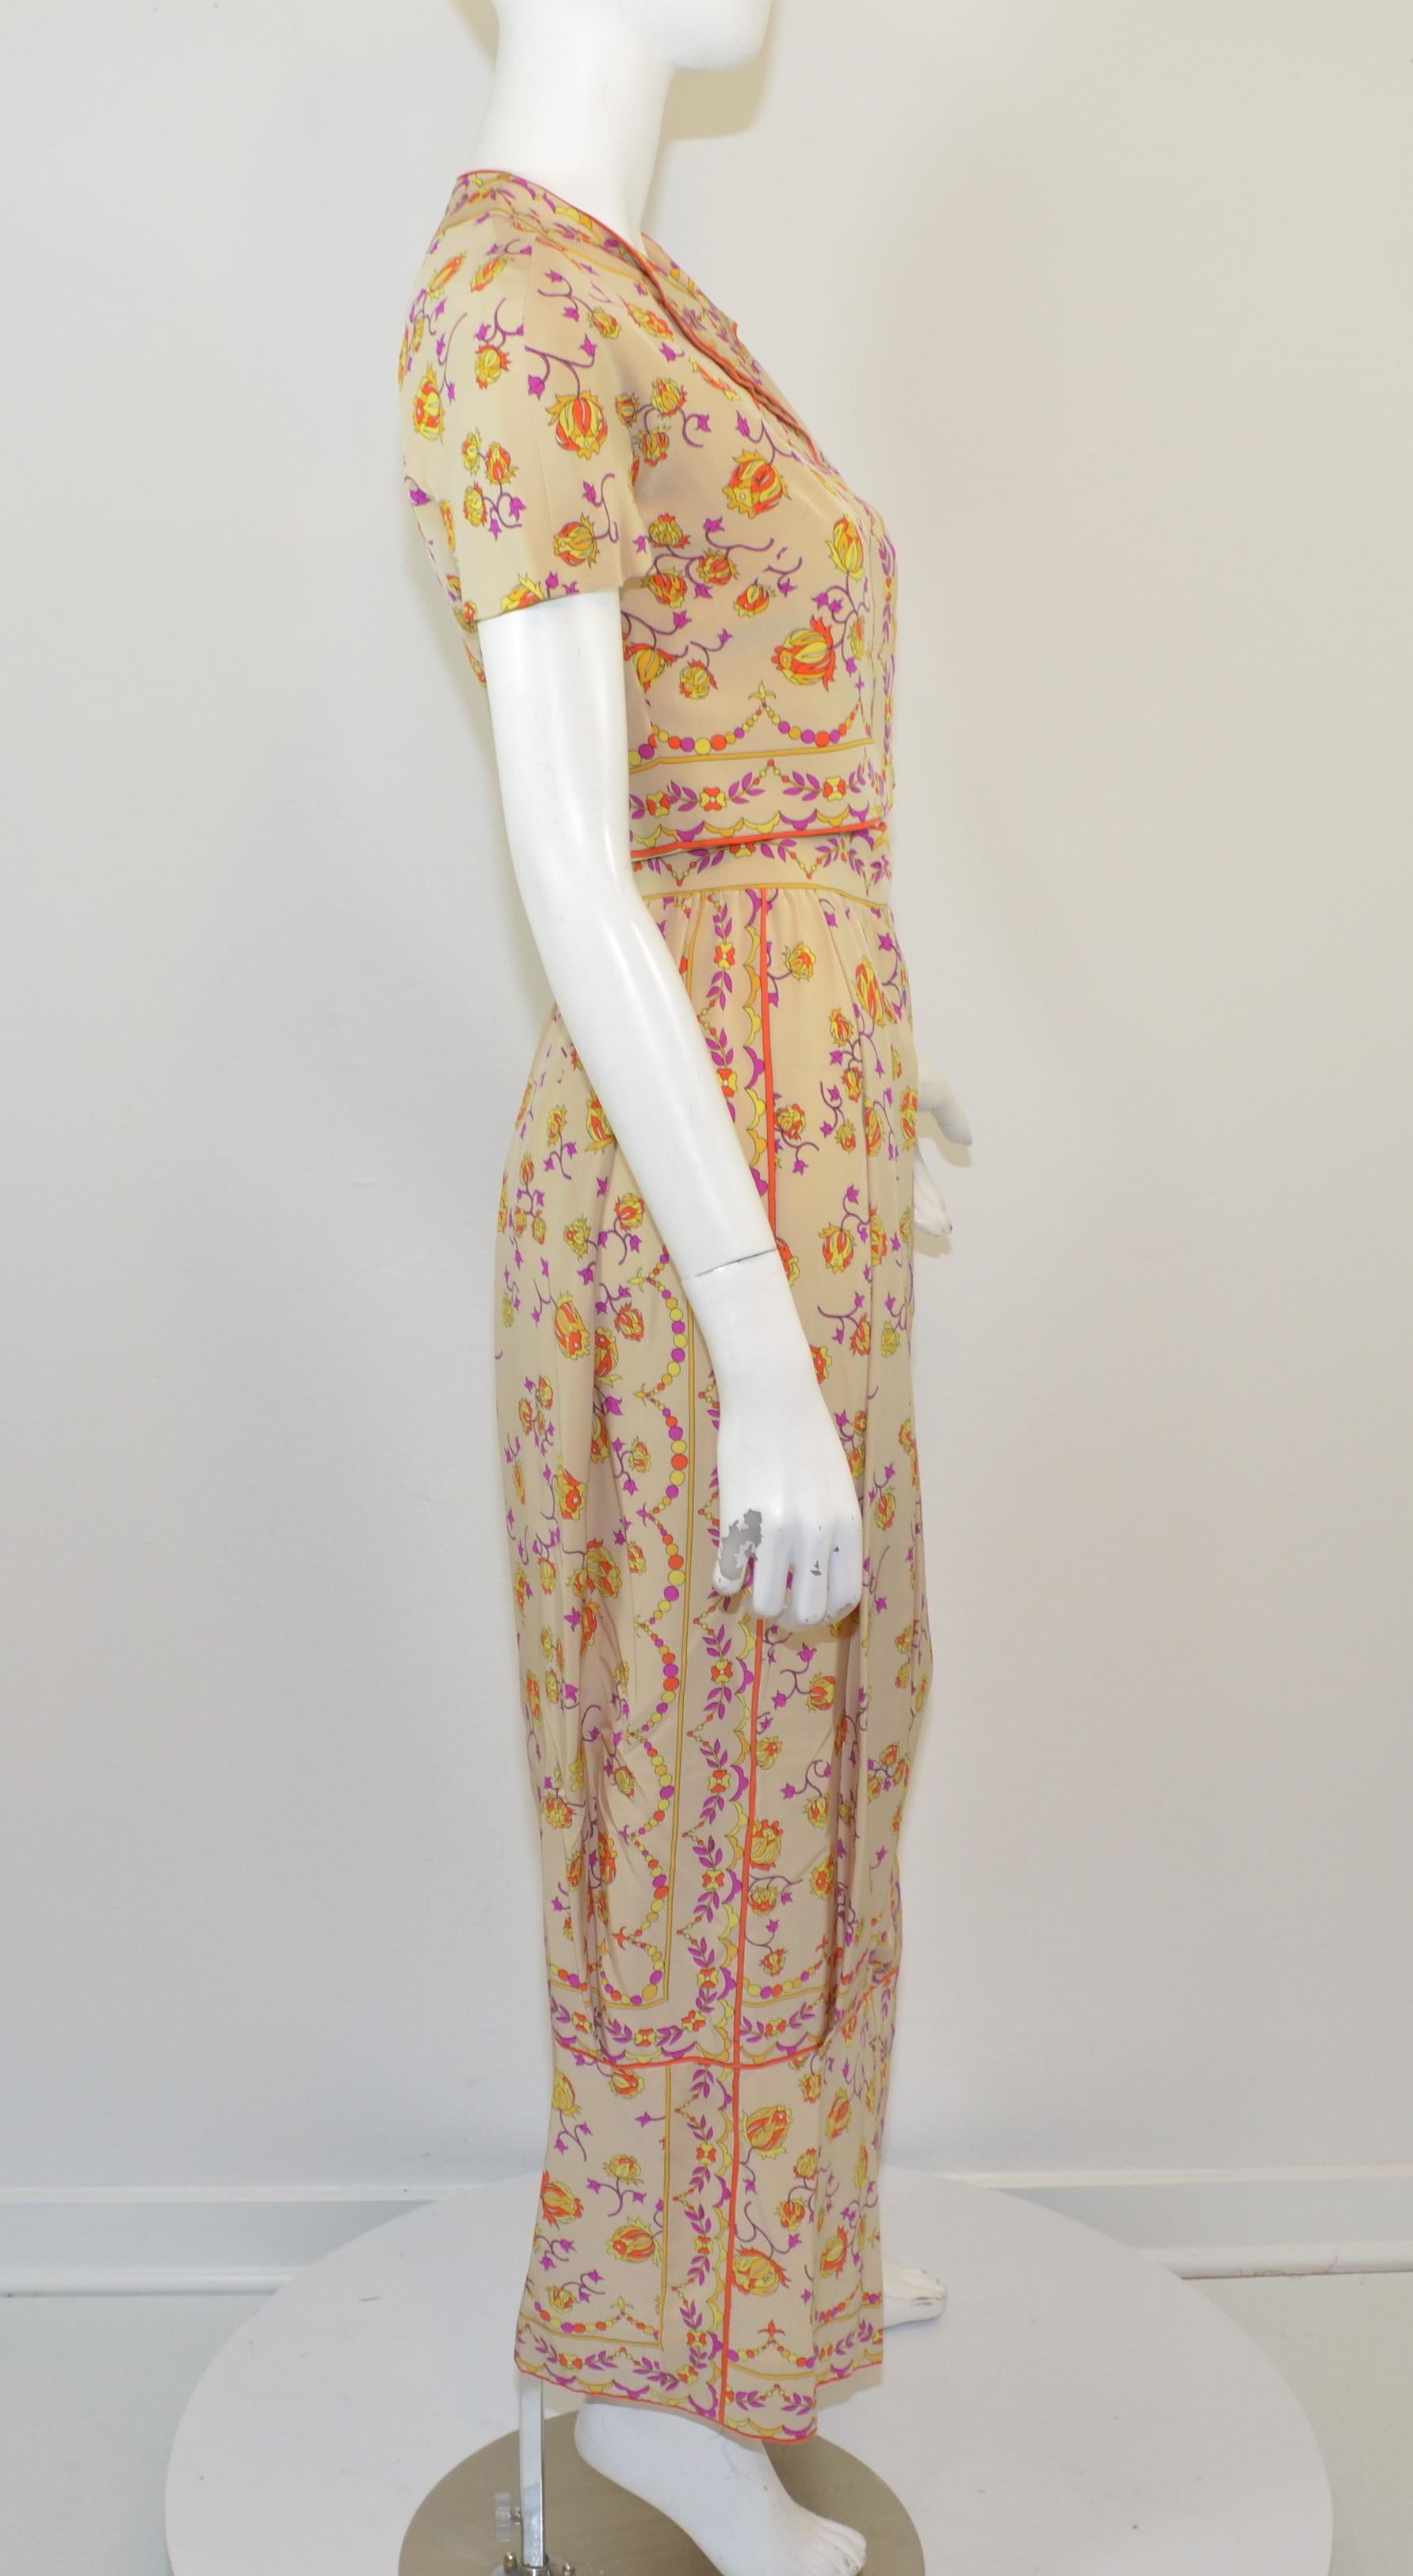 Beige Emilio Pucci Vintage 1970's Print Cropped Top and Maxi Skirt Set